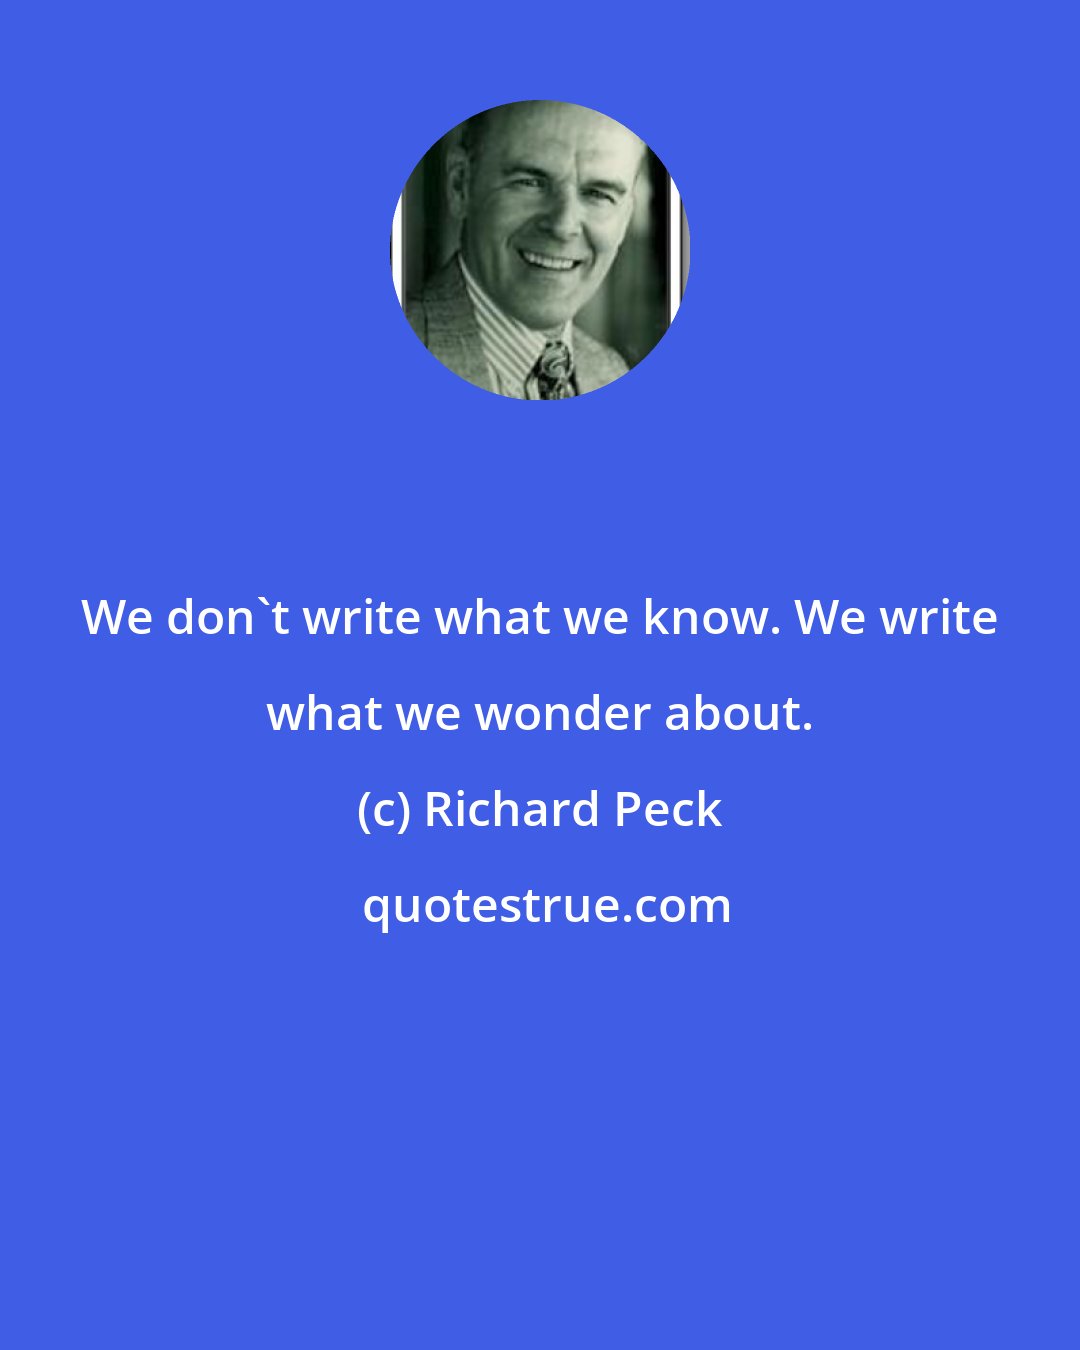 Richard Peck: We don't write what we know. We write what we wonder about.